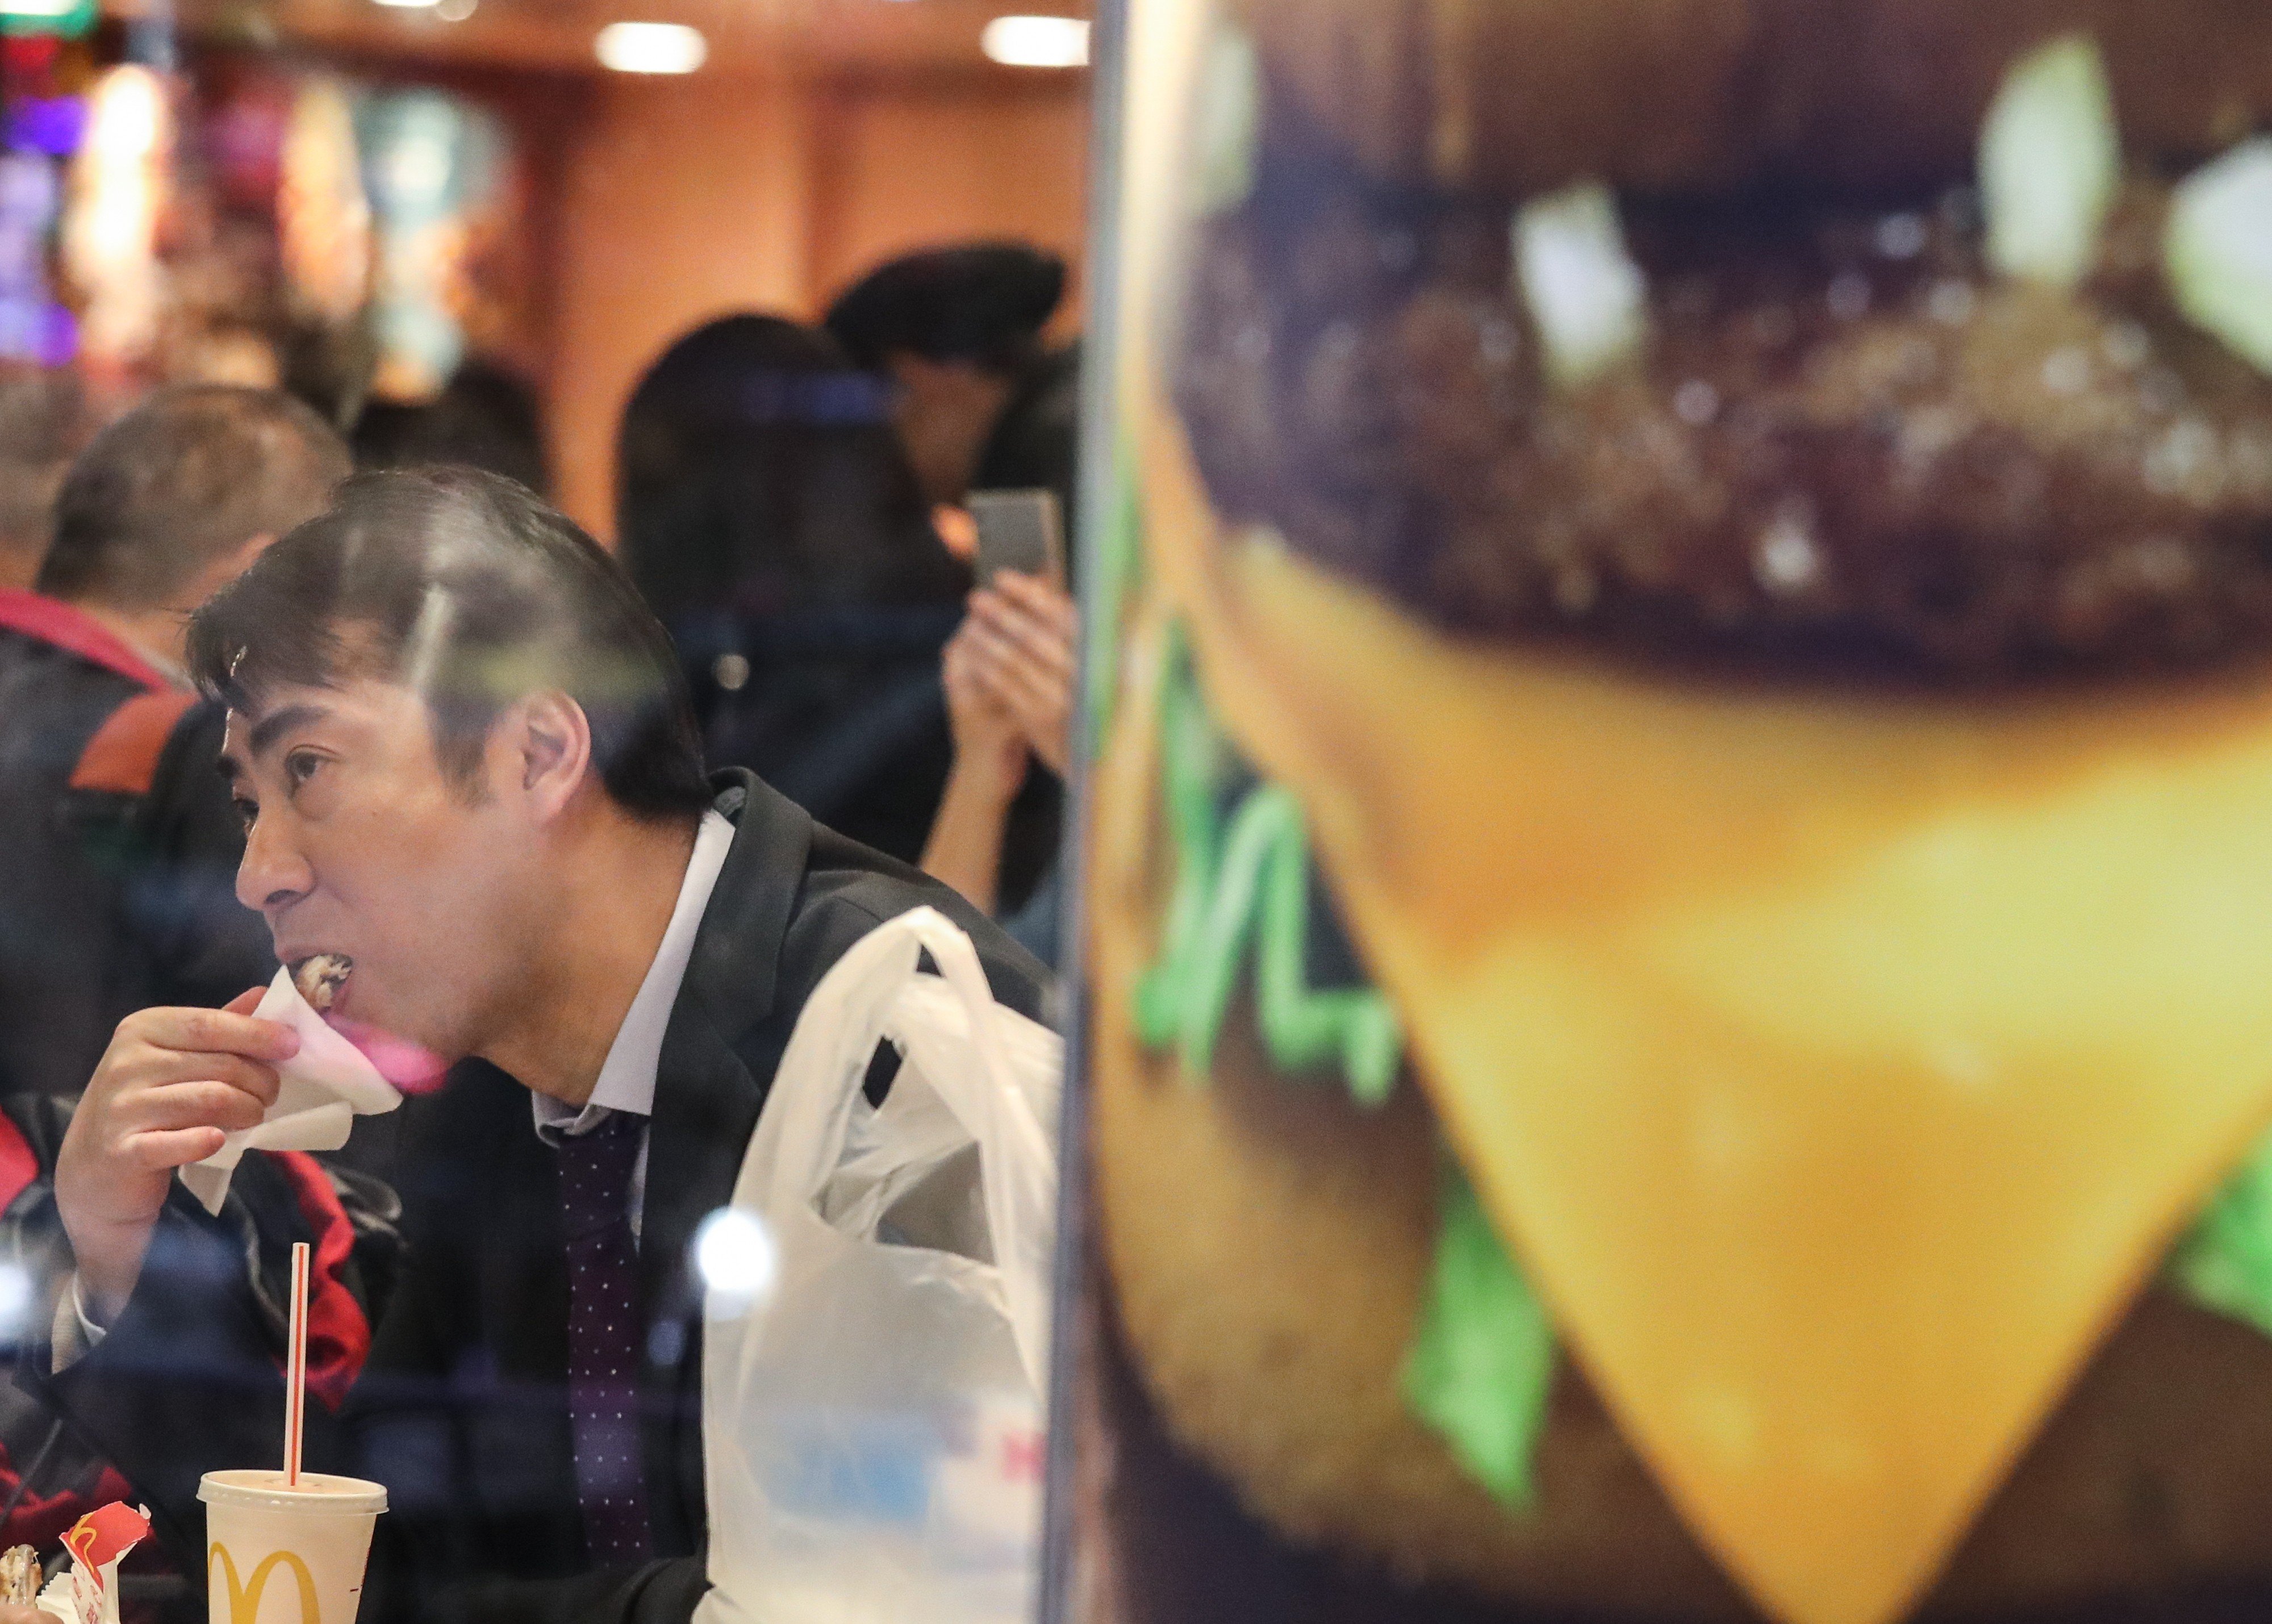 The adoption of Western diet and lifestyle is causing weight problems in Hong Kong and across Asia. Photo: Nora Tam